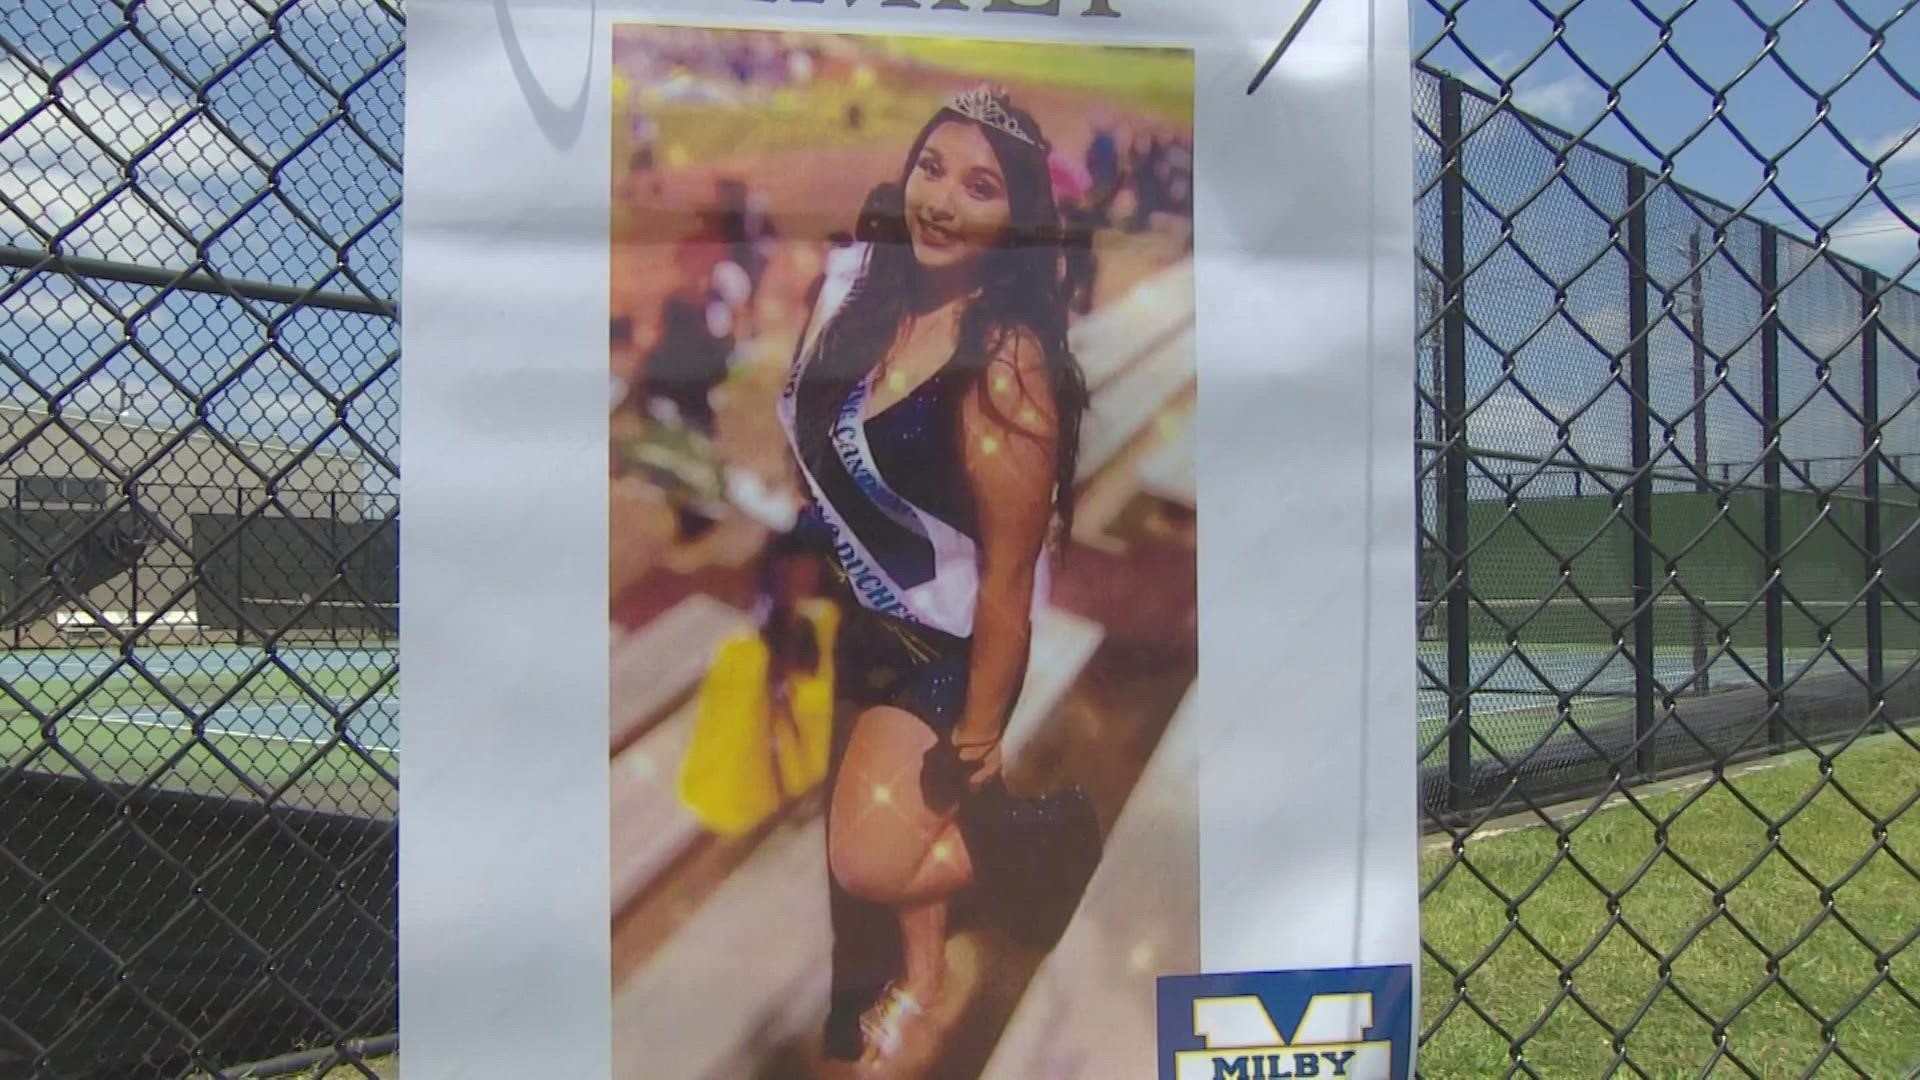 Milby students gathered on the softball field Tuesday in honor of 16-year-old Emily Castilleja, the girl killed in Monday's crash.